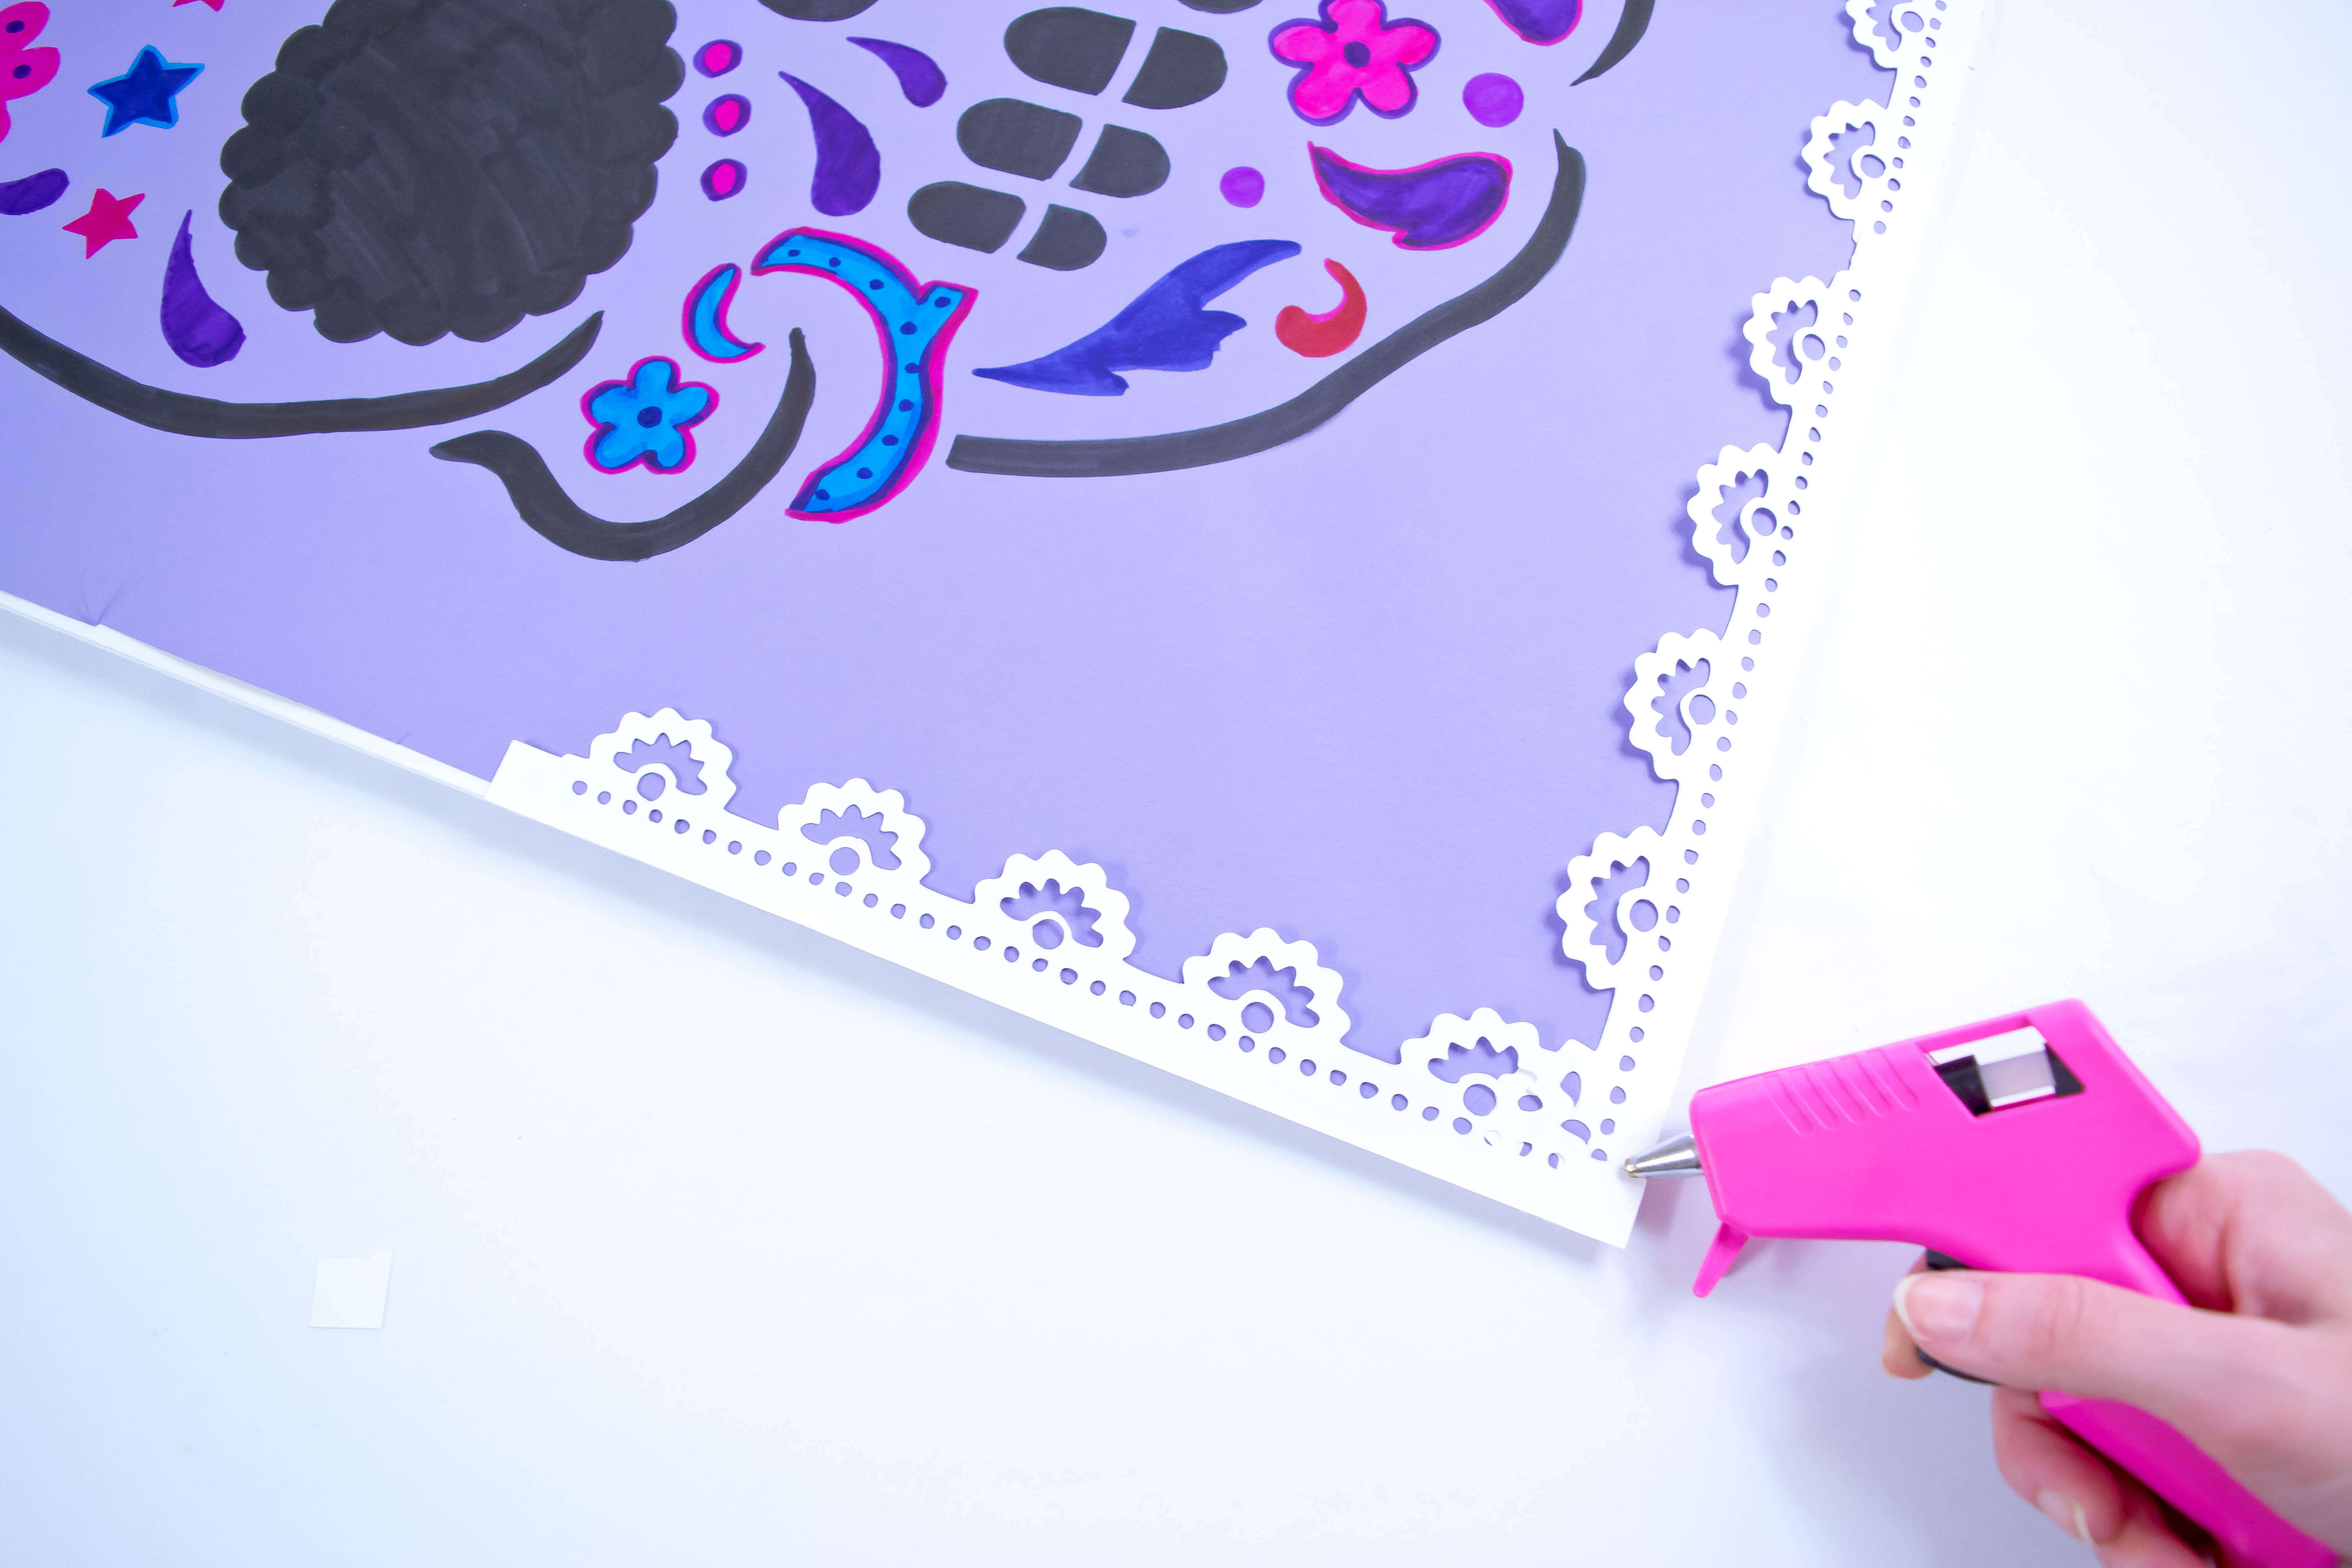 A person uses a pink crafting glue gun to attach a white paper lace border to the purple sugar skull poster.